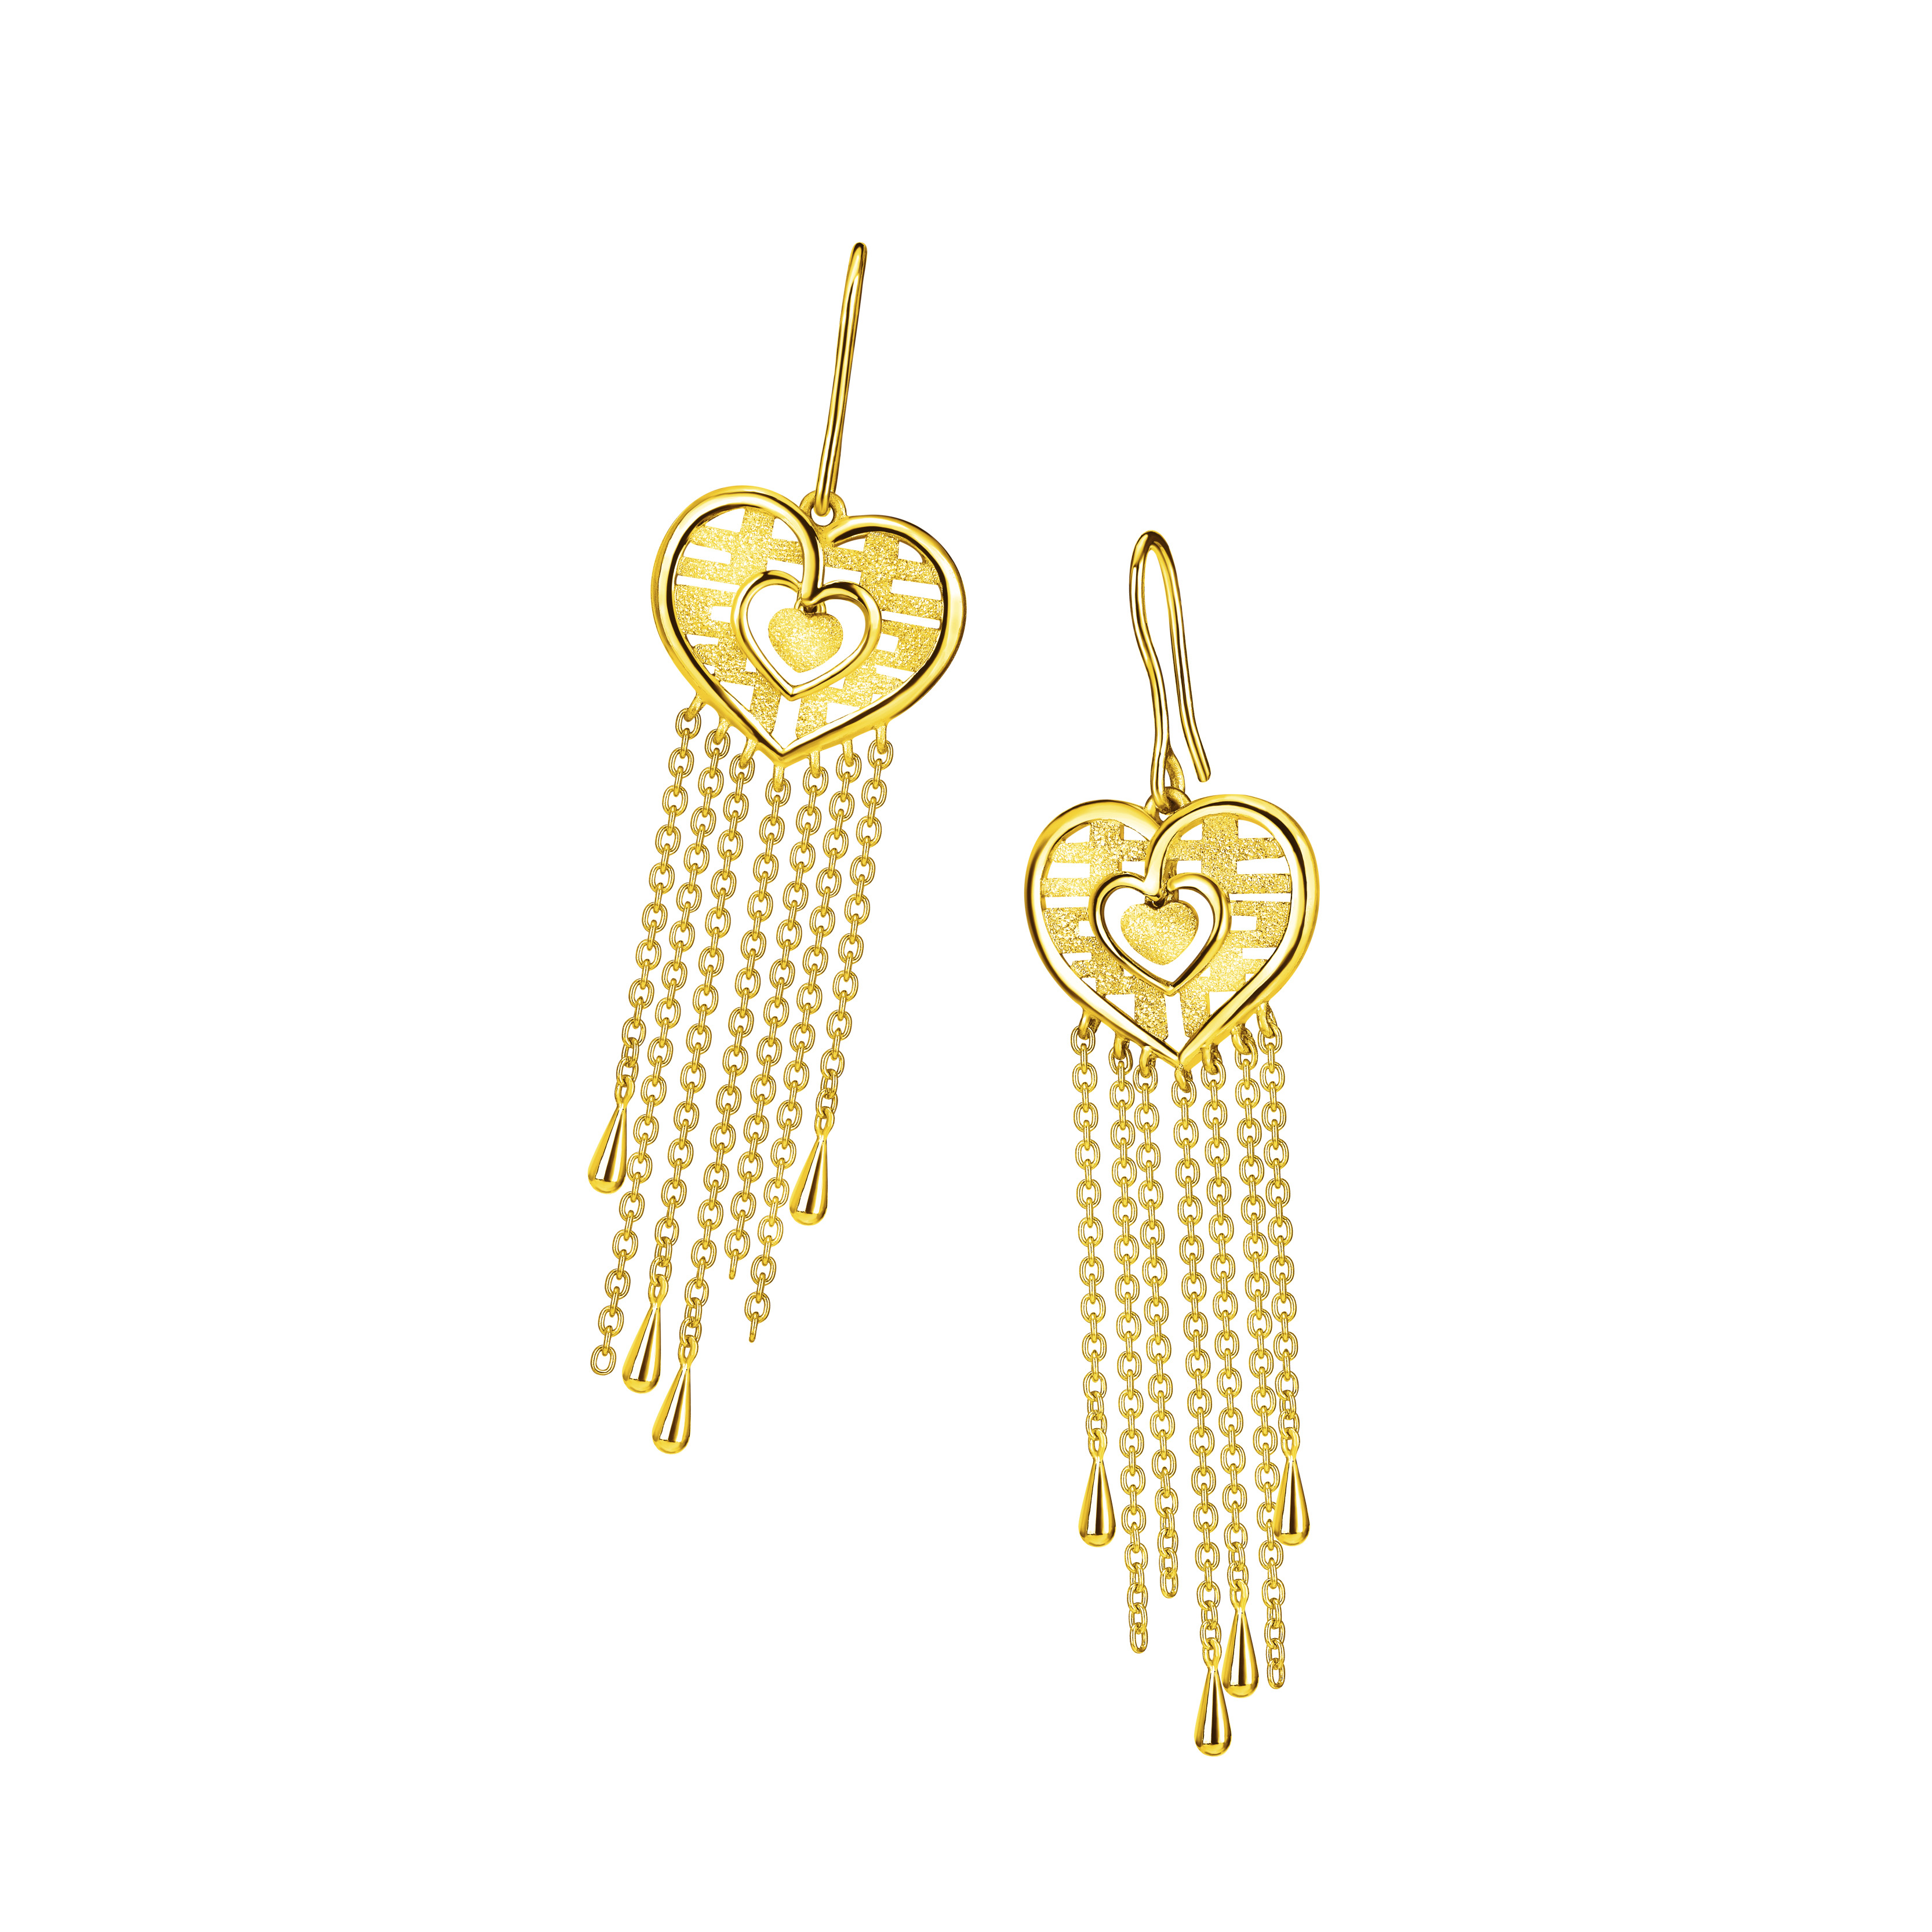 Beloved Collection "Heart beats as One" Gold Earrings